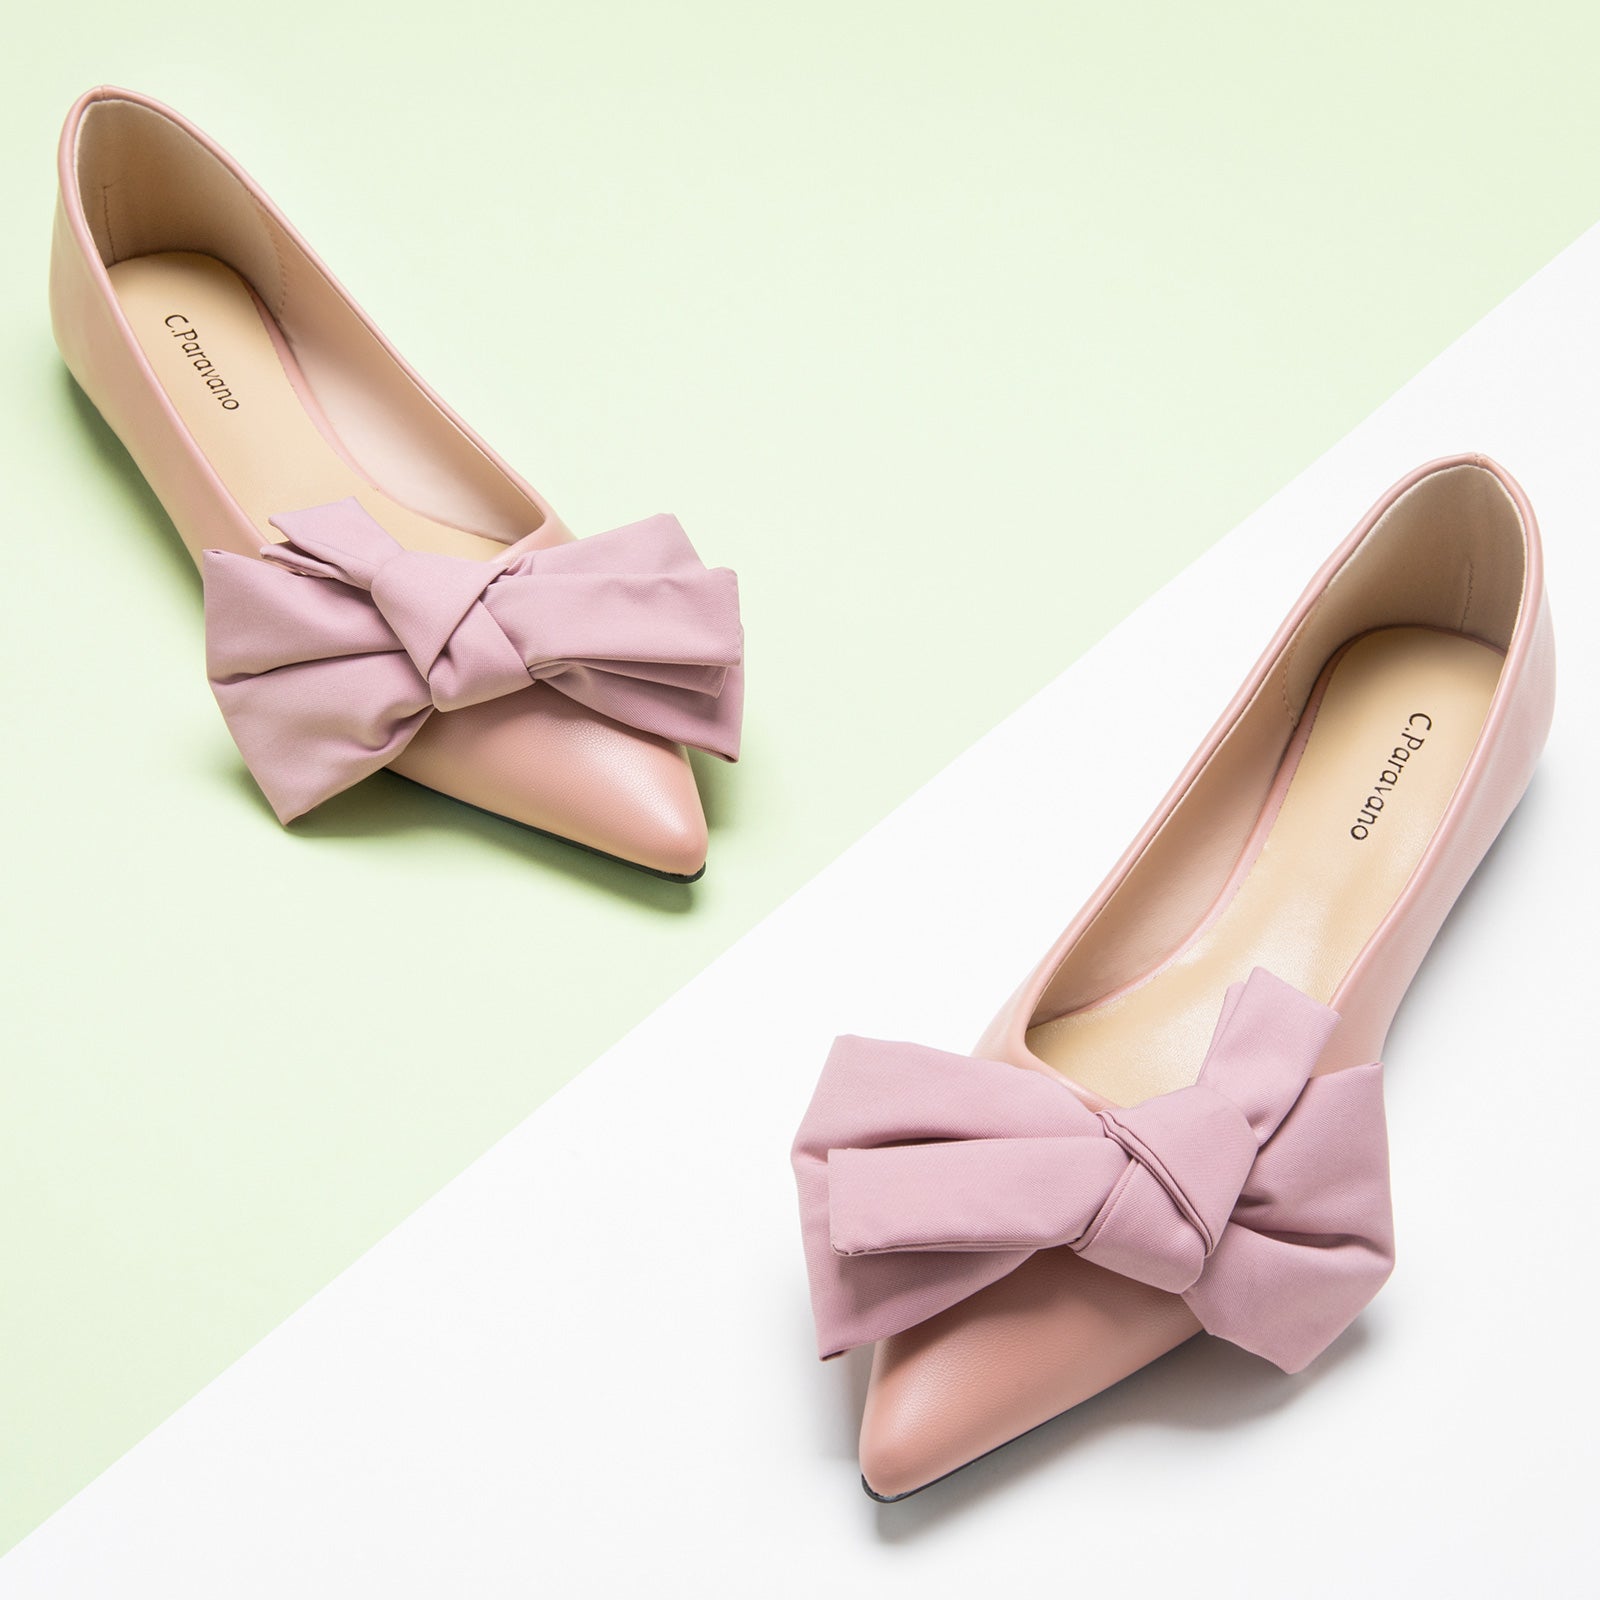 Elevate your style with these ivory flats adorned with a stylish bow embellishment, offering effortless elegance and a neutral fashion statement